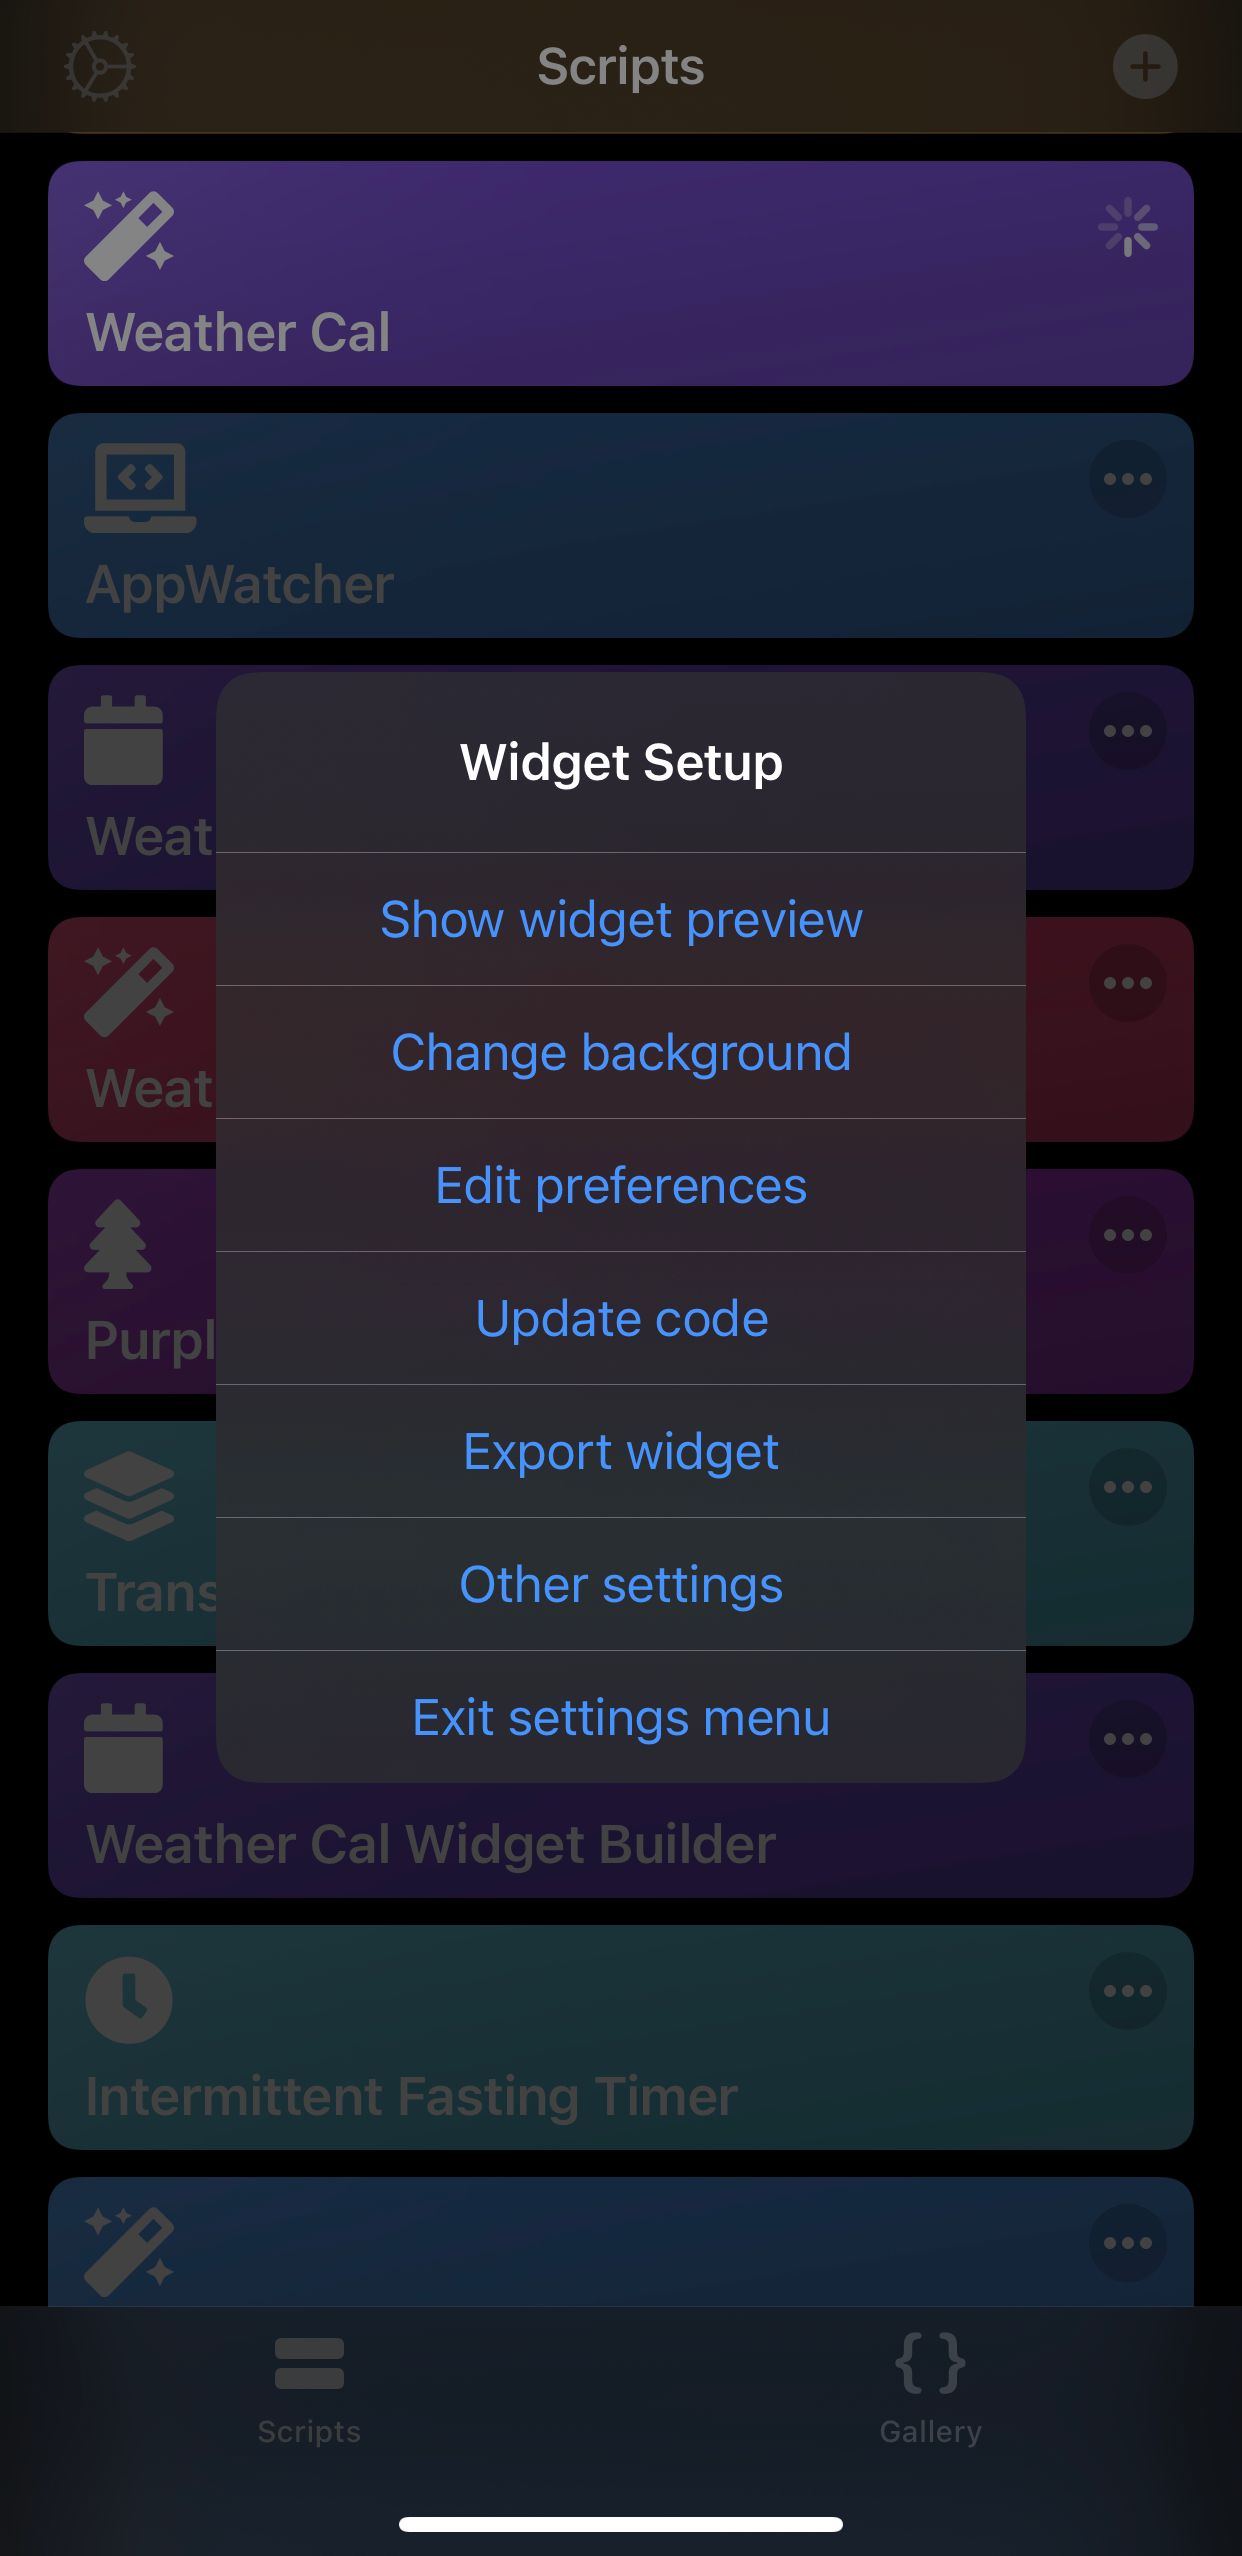 Weather Cal's settings menu makes it easy for non-programmers to customize the widget